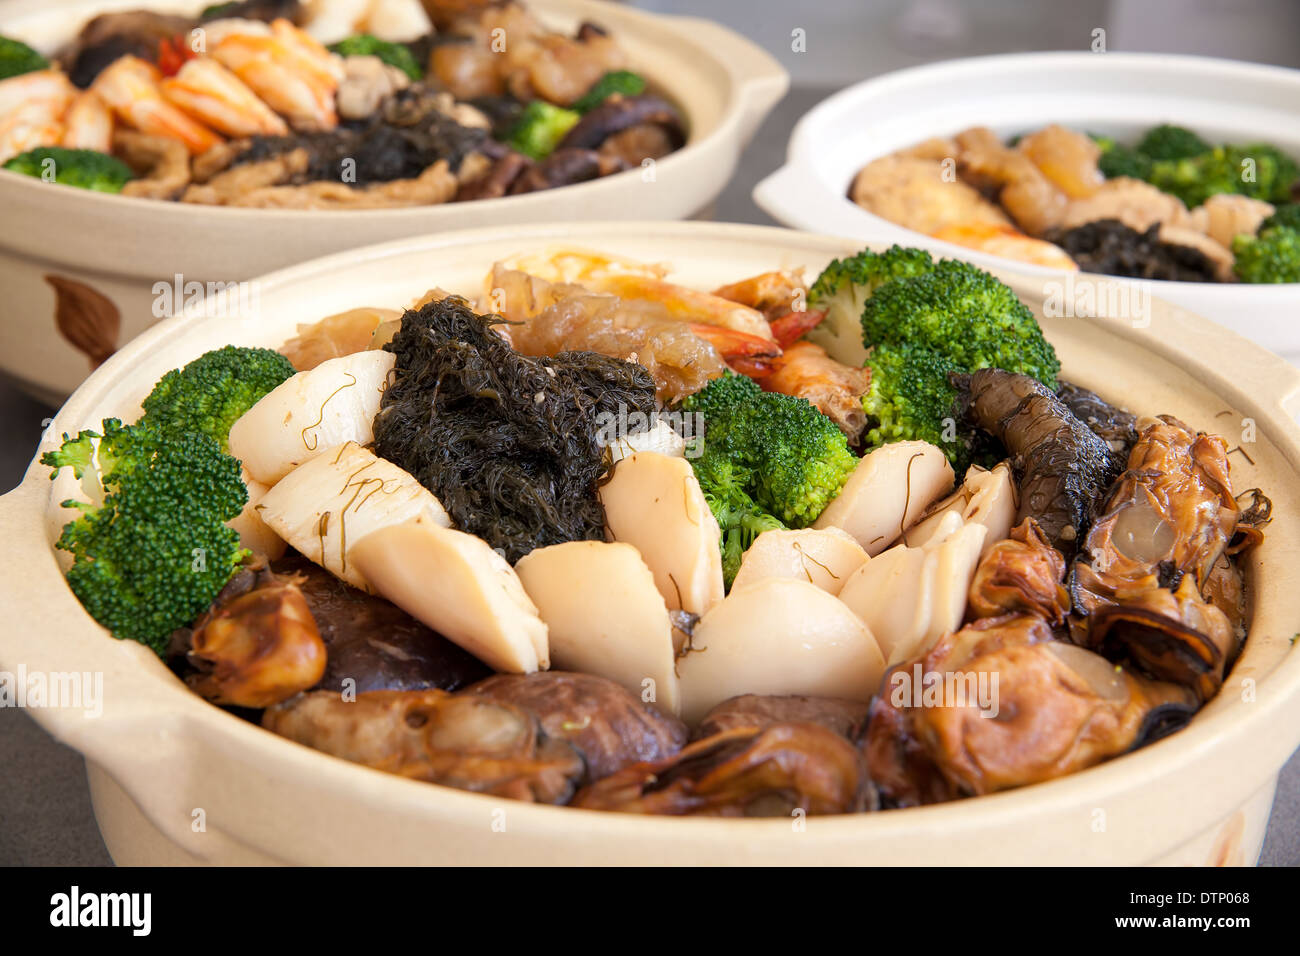 Poon Choi Hong Kong Cantonese Cuisine Big Feast Bowls with Seafood and Vegetables for Chinese New Year Dinner Closeup Stock Photo